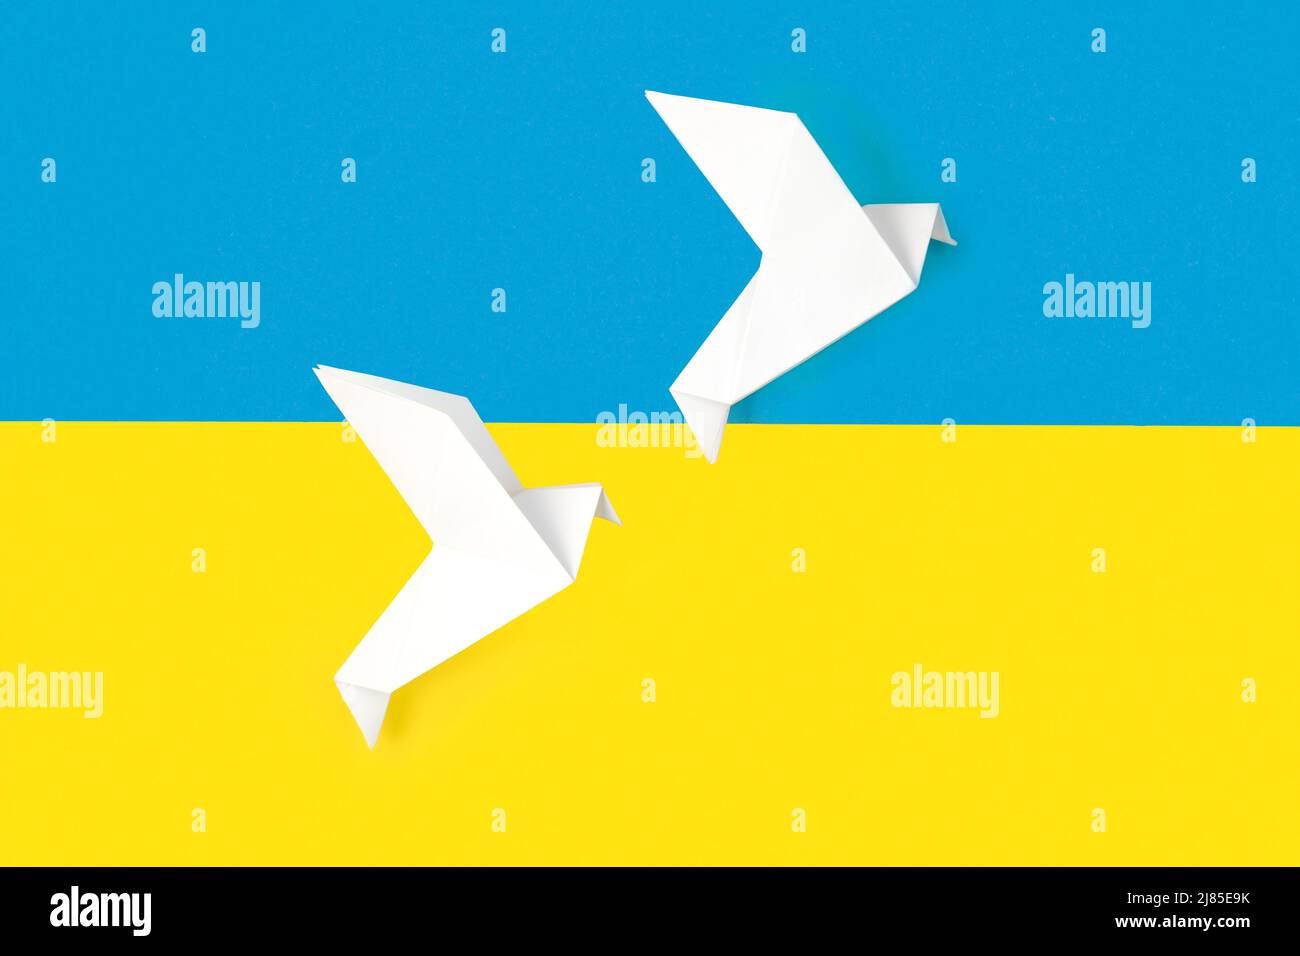 Two white origami paper doves on colors of flag of Ukraine. The concept of peace between two states. Symbol of peace on blue and yellow background. Stock Photo